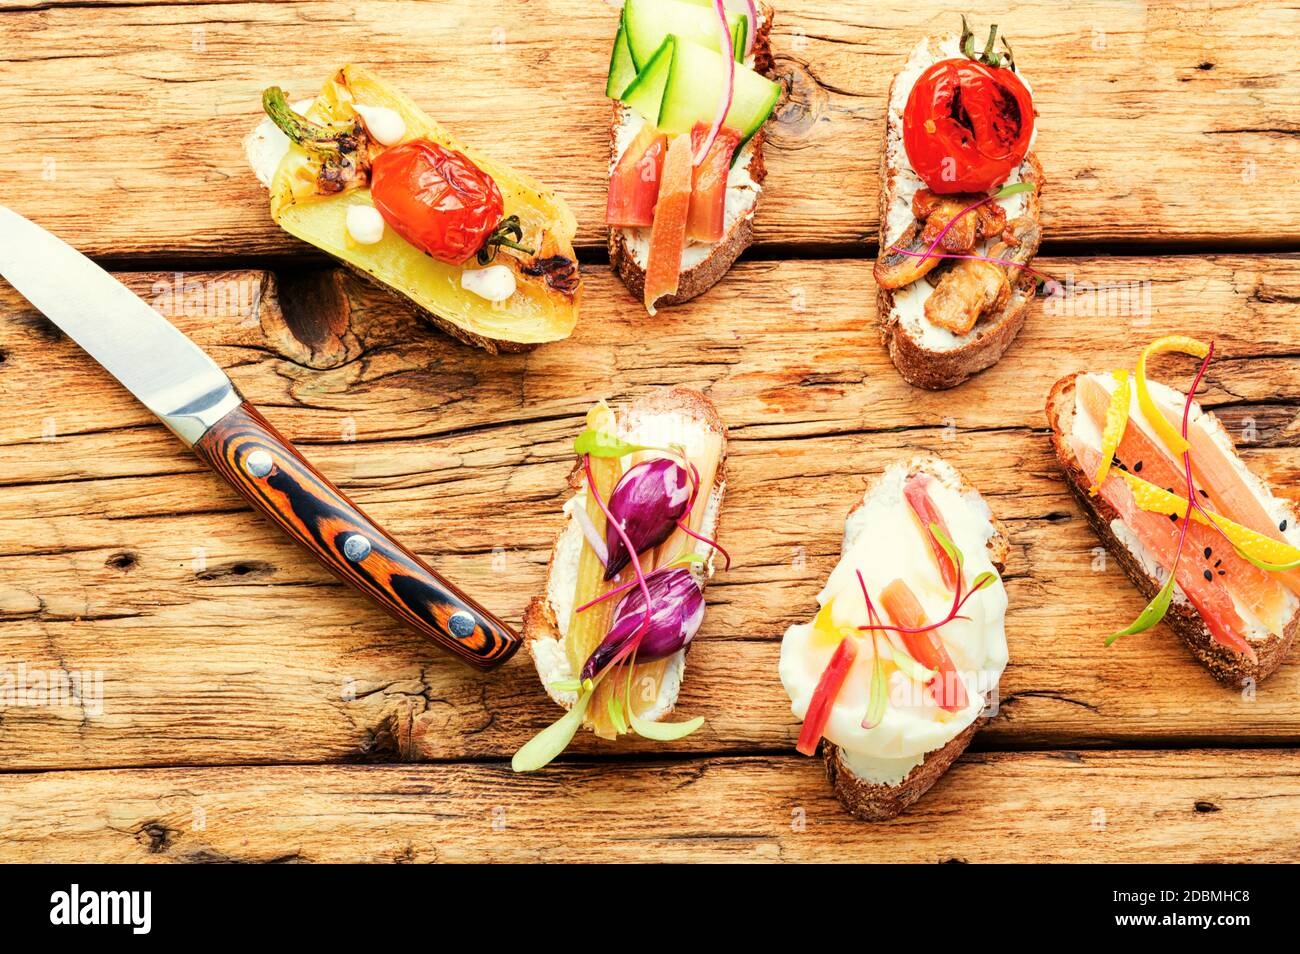 Set of delicious Italian bruschettas with grilled vegetables. Stock Photo